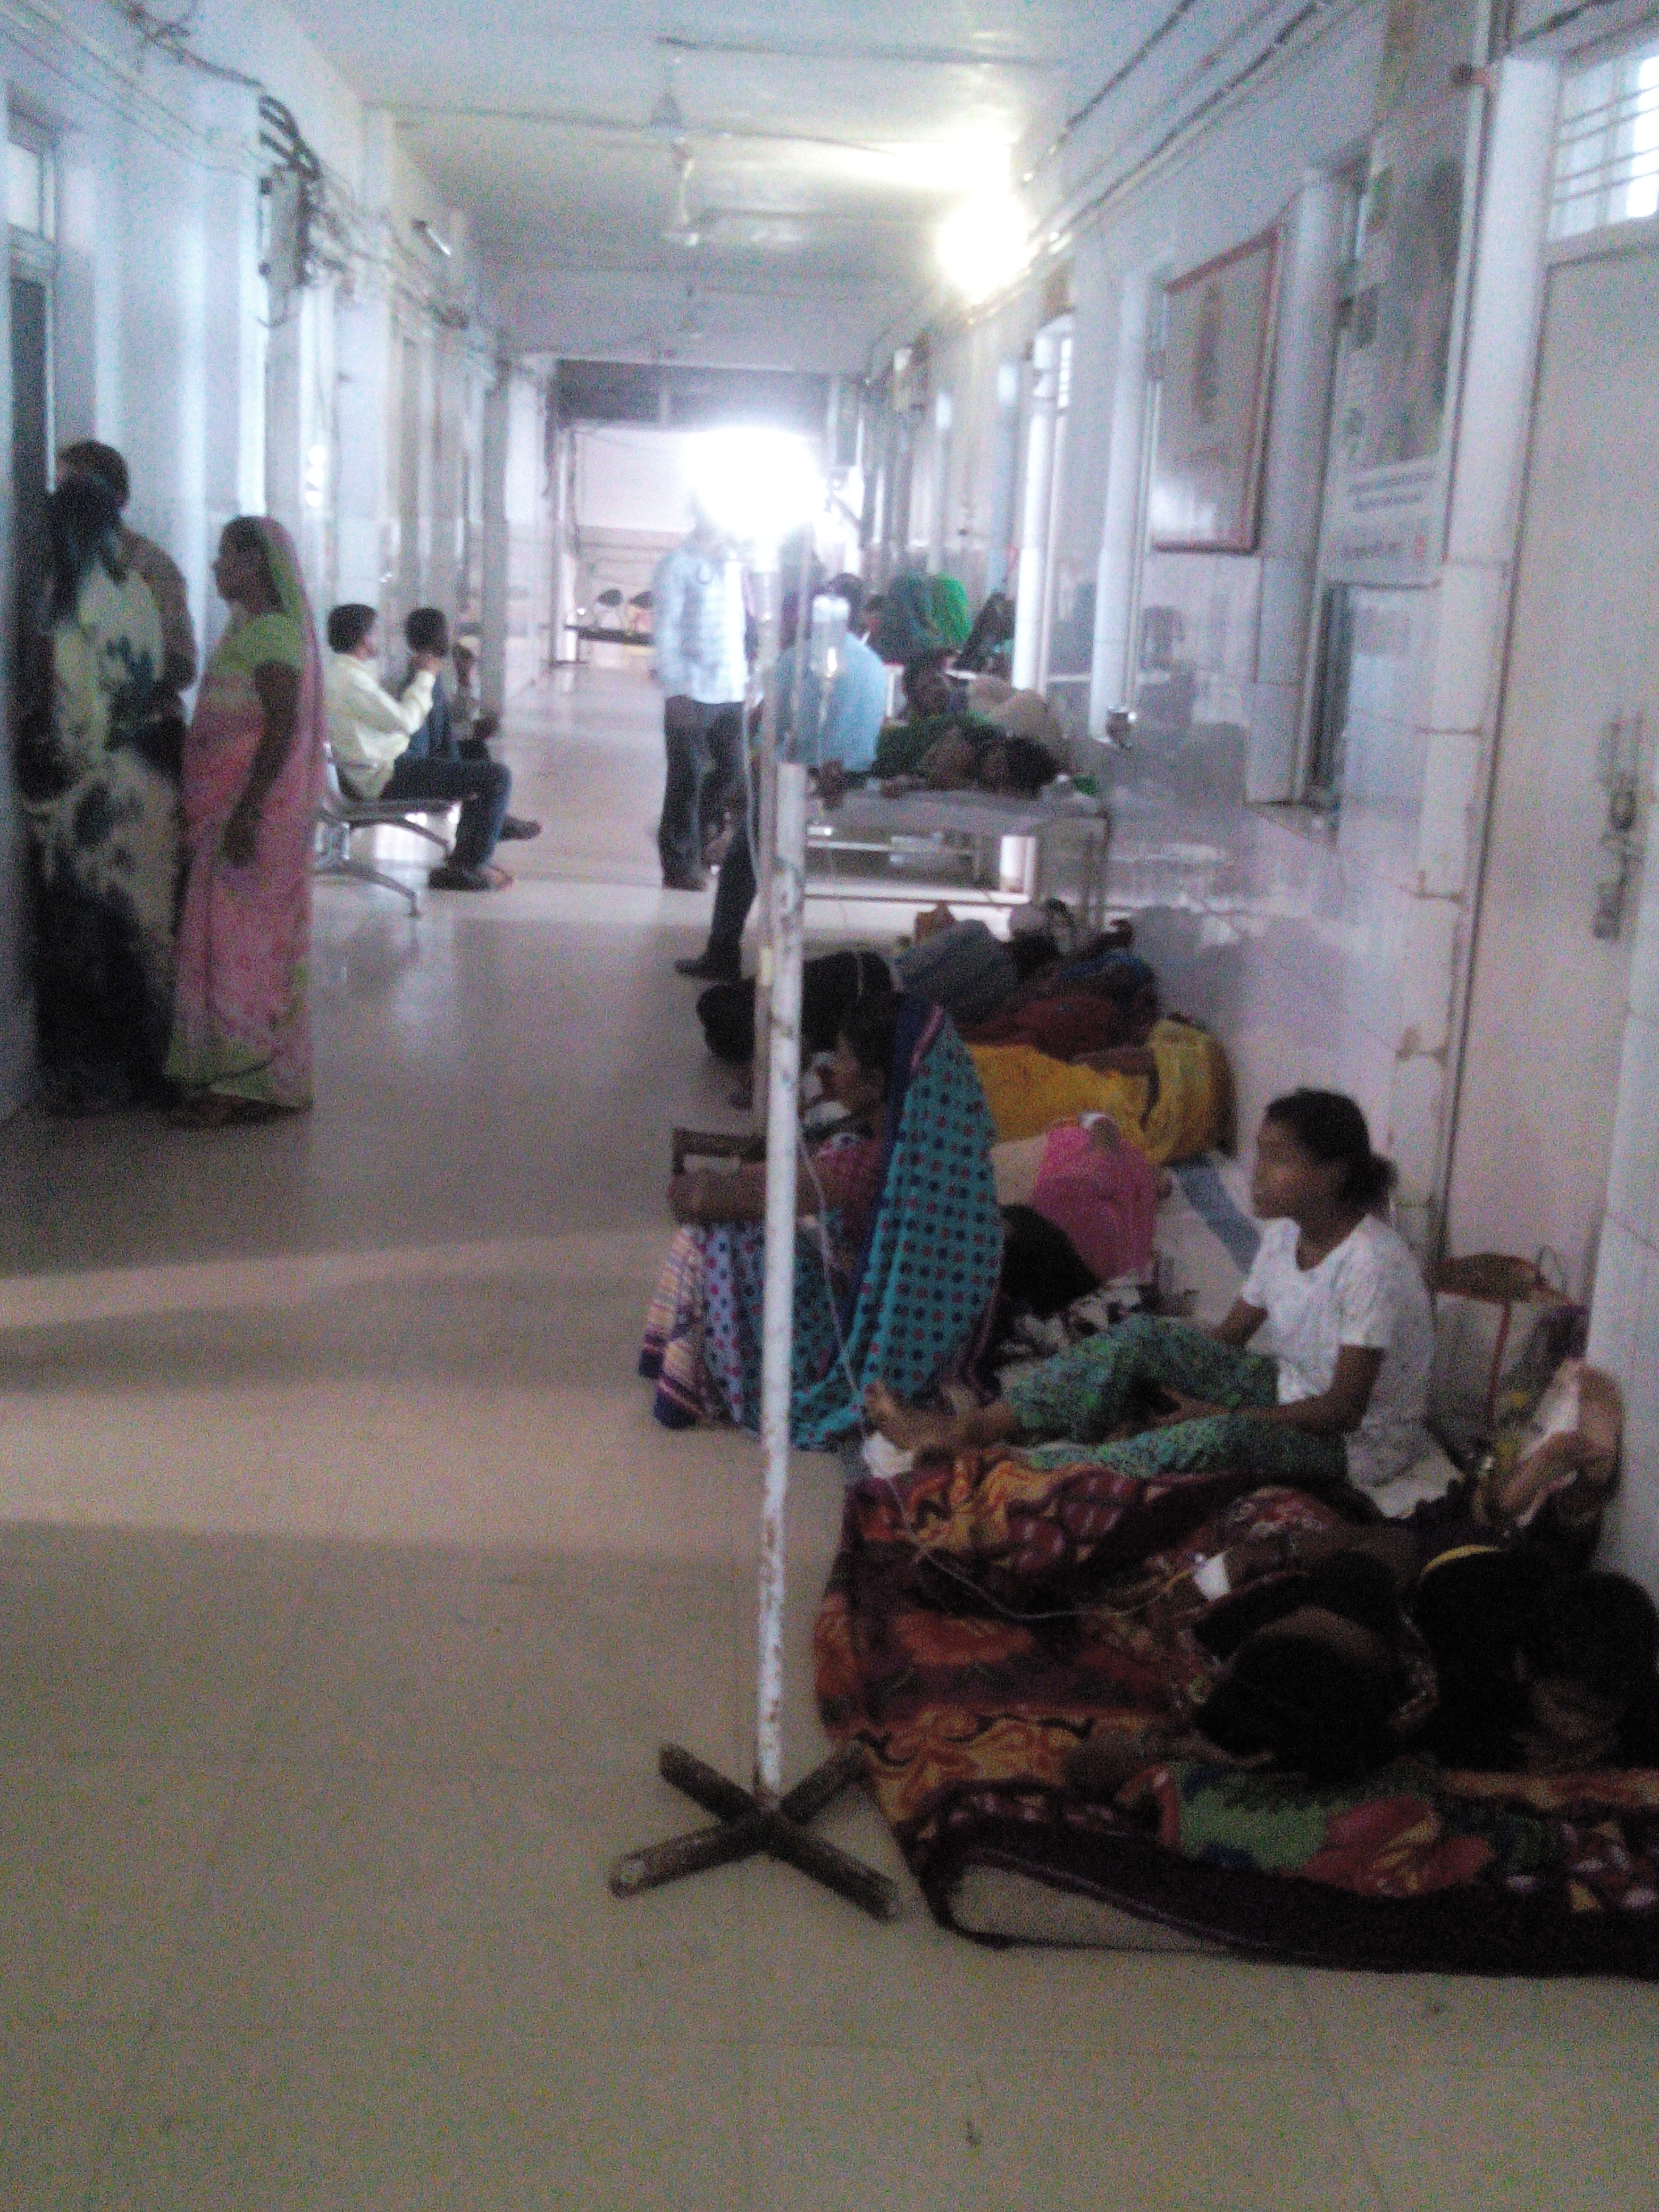 Shortage of doctors in primary and community health centers of this di